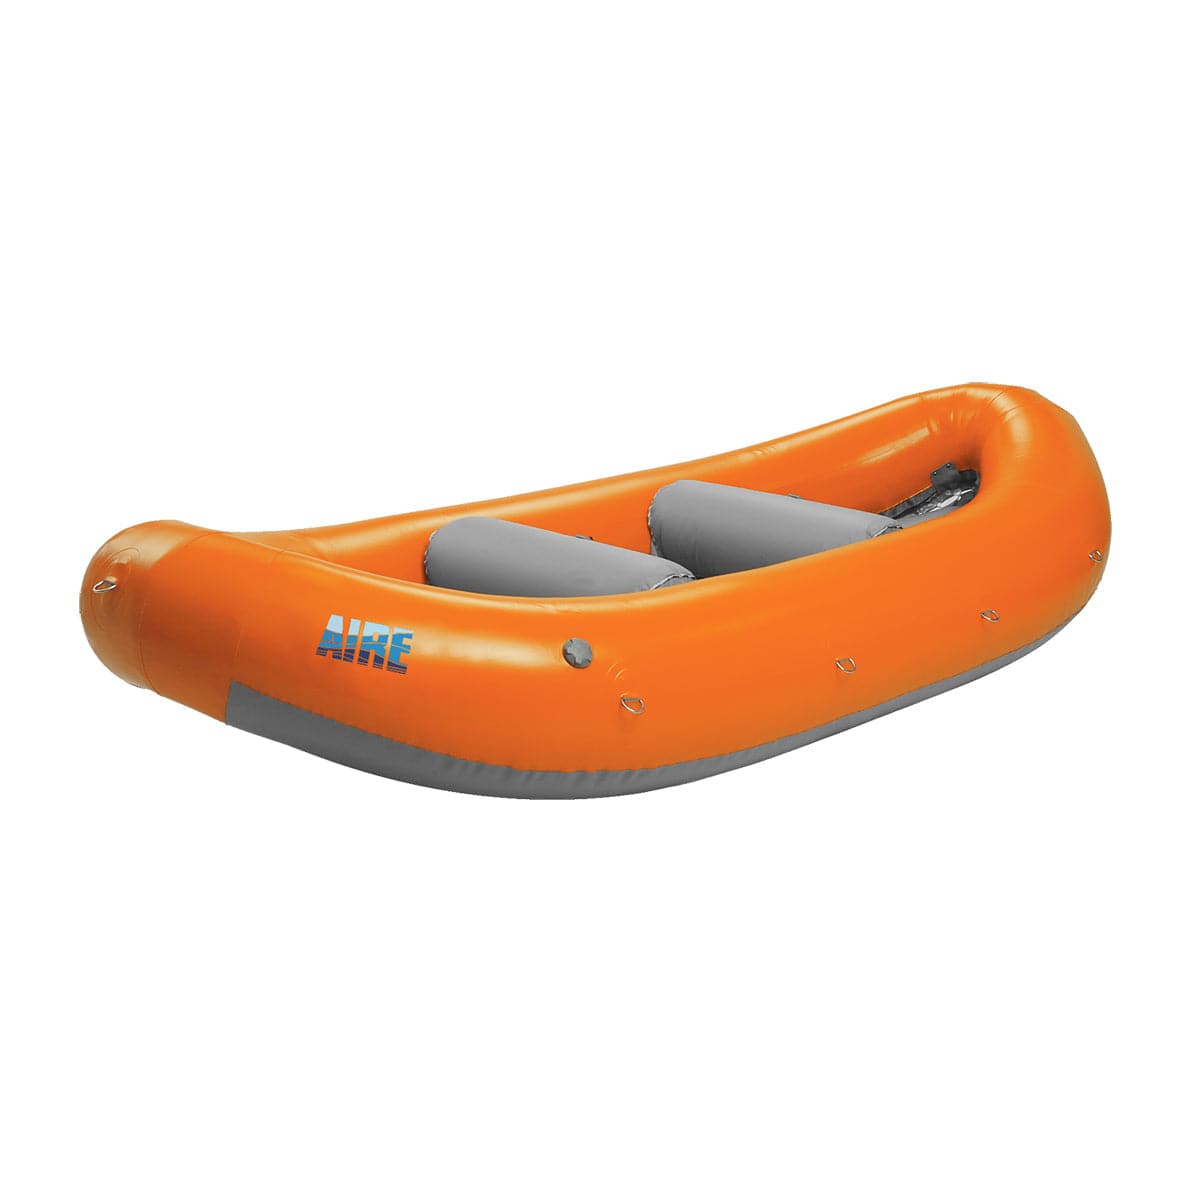 Featuring the Puma 11.5 fishing cat, fishing raft, raft manufactured by AIRE shown here from a thirteenth angle.